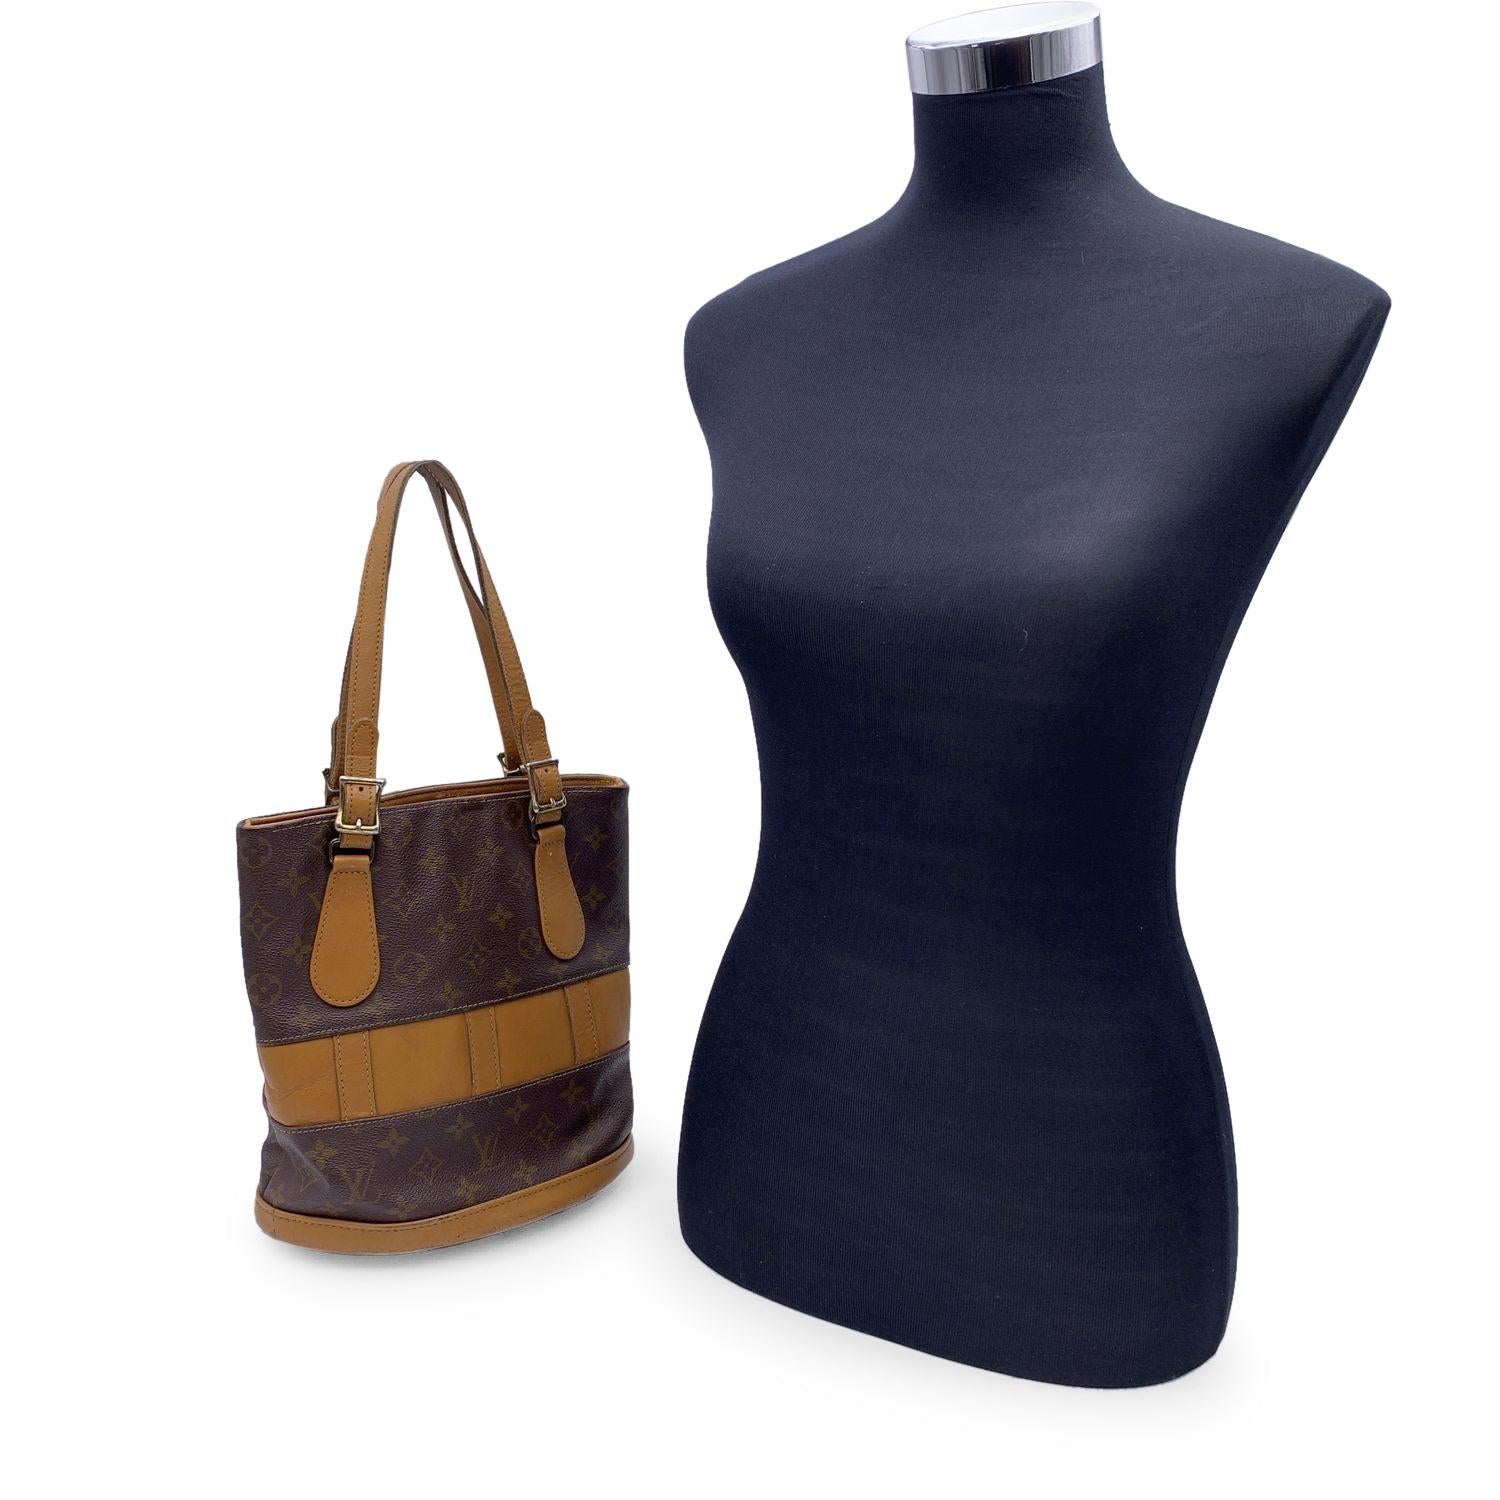 Vintage LOUIS VUITTON Monogram small Bucket Bag, crafted in monogram canvas with caramel colored cowhide leather trim and handles. The interior of the bag is a brown fabric with a zip pocket and a chain with a removable pouch. Louis Vuitton French